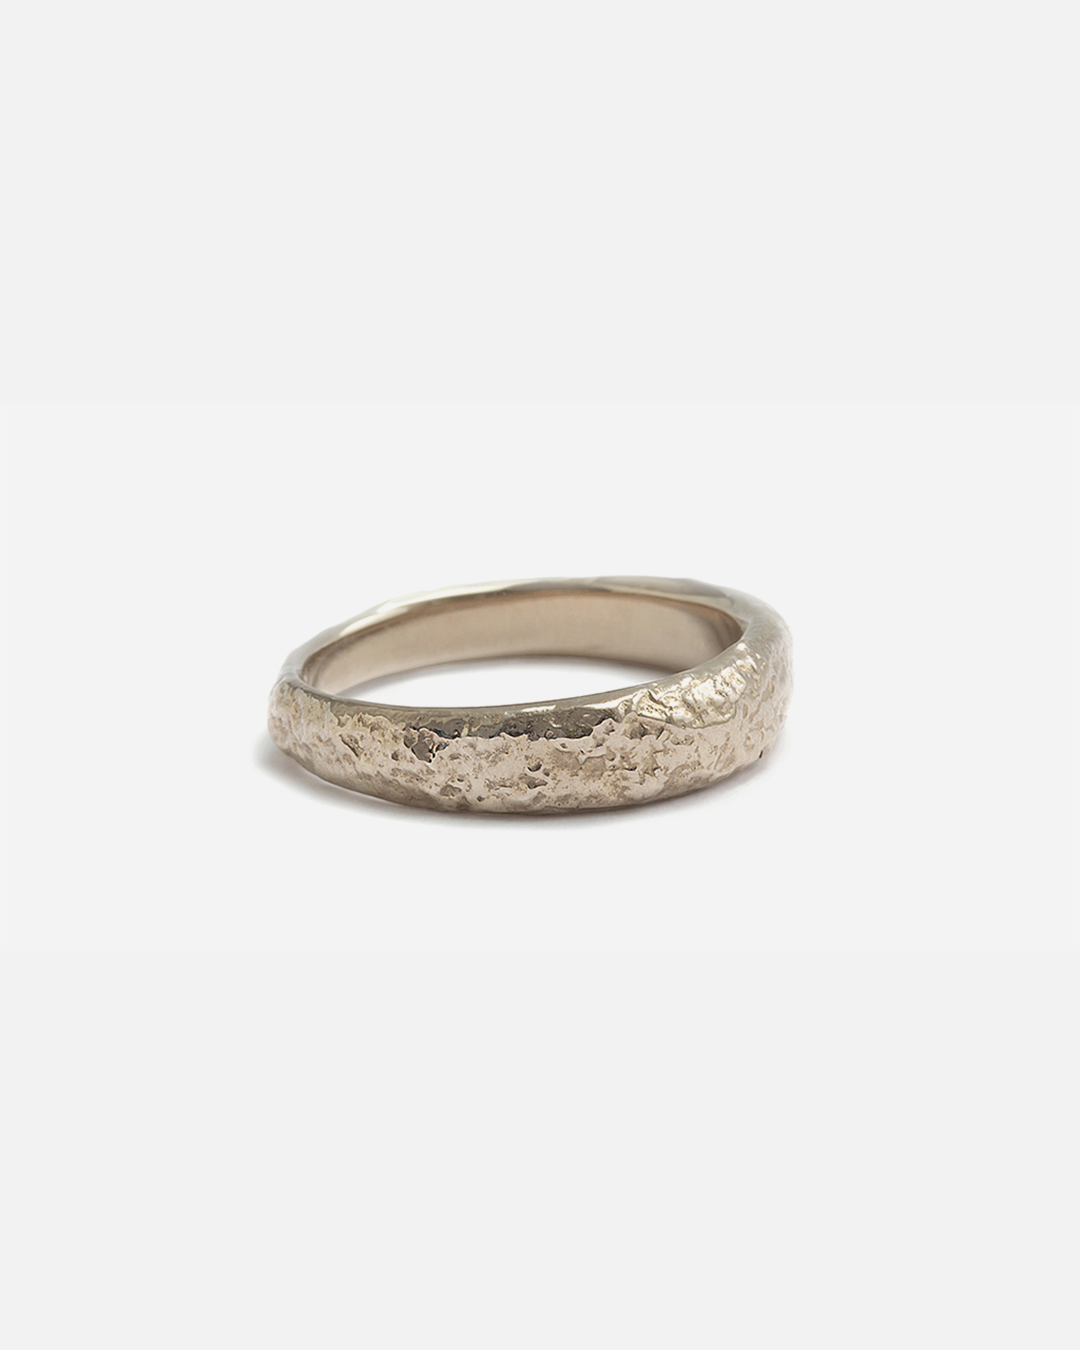 Moon Band / Reticulated By Hiroyo in Wedding Bands Category